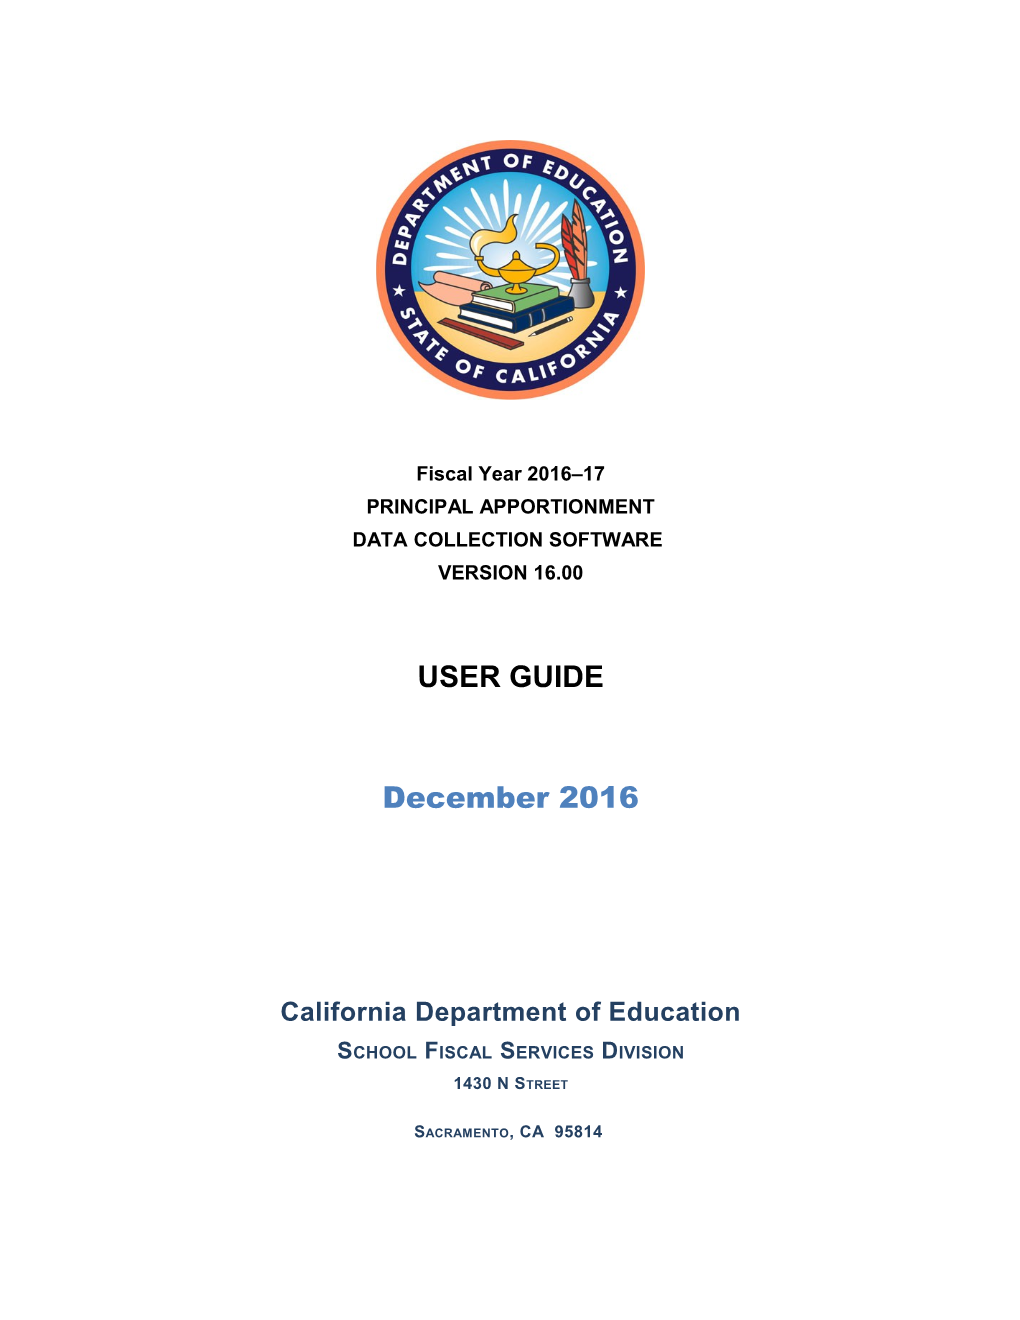 PA Software User Guide, FY 2016-17 - Principal Apportionment (CA Dept of Education)